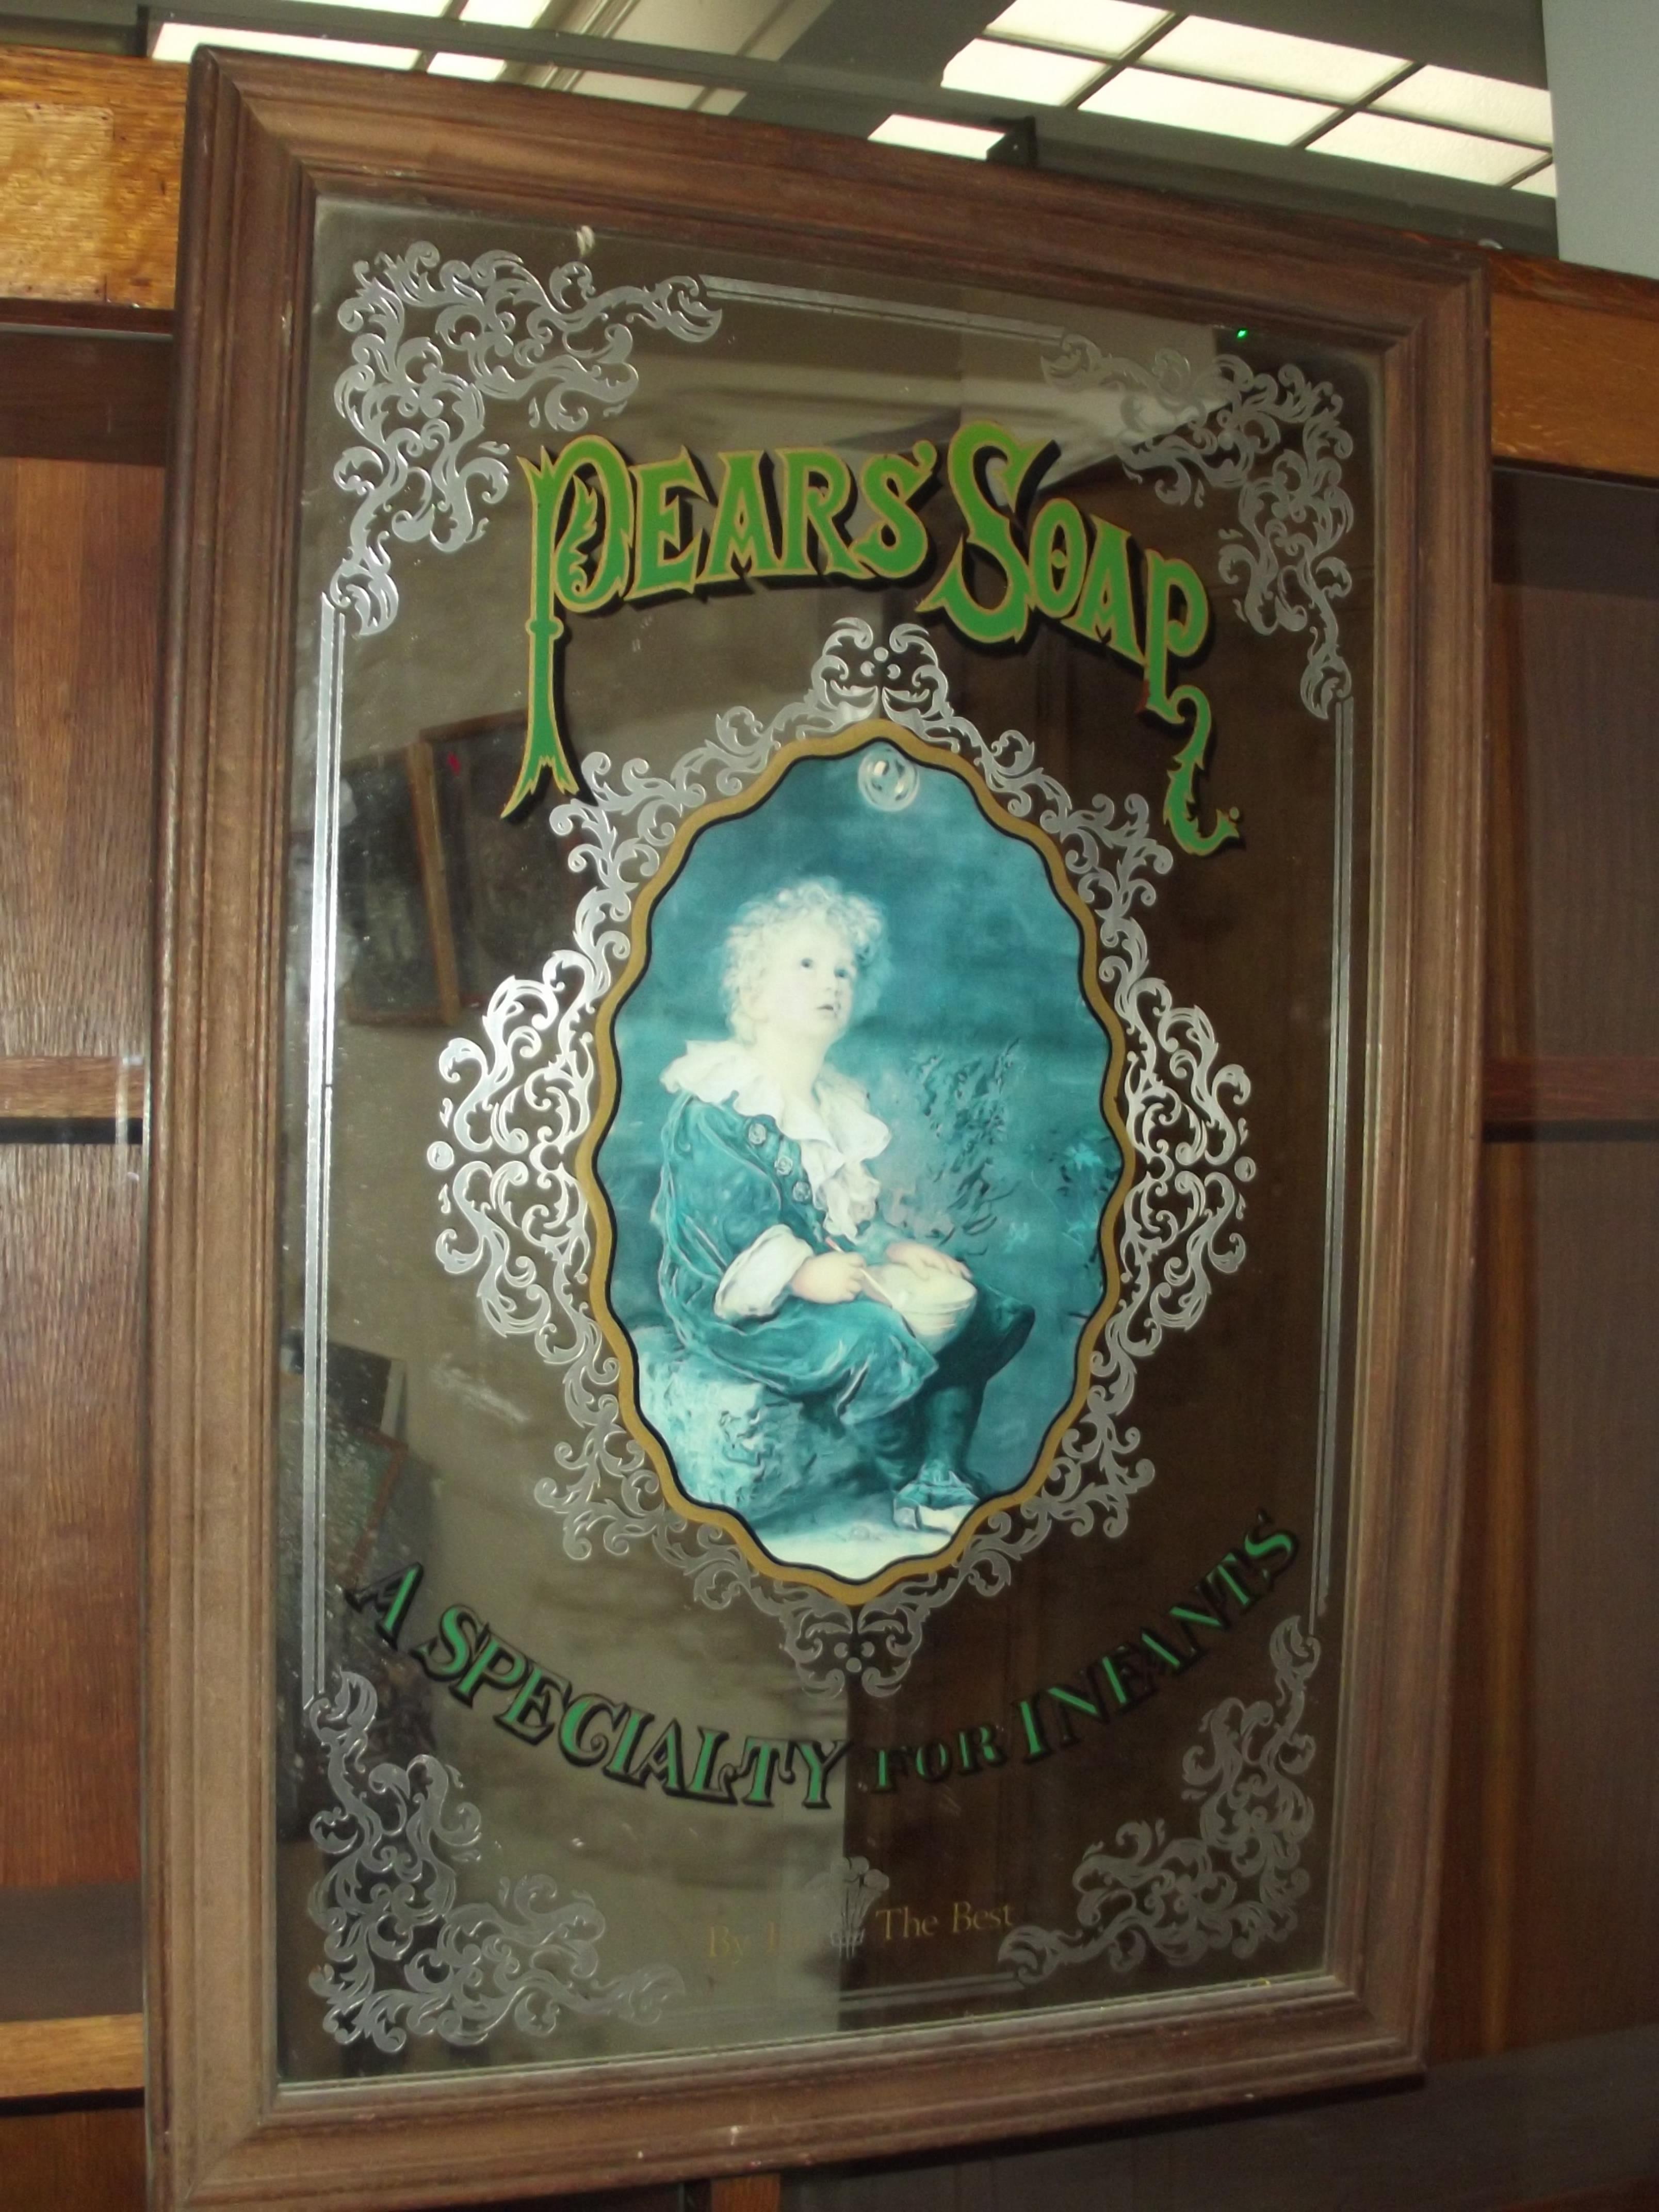 Pears soap advertising mirror